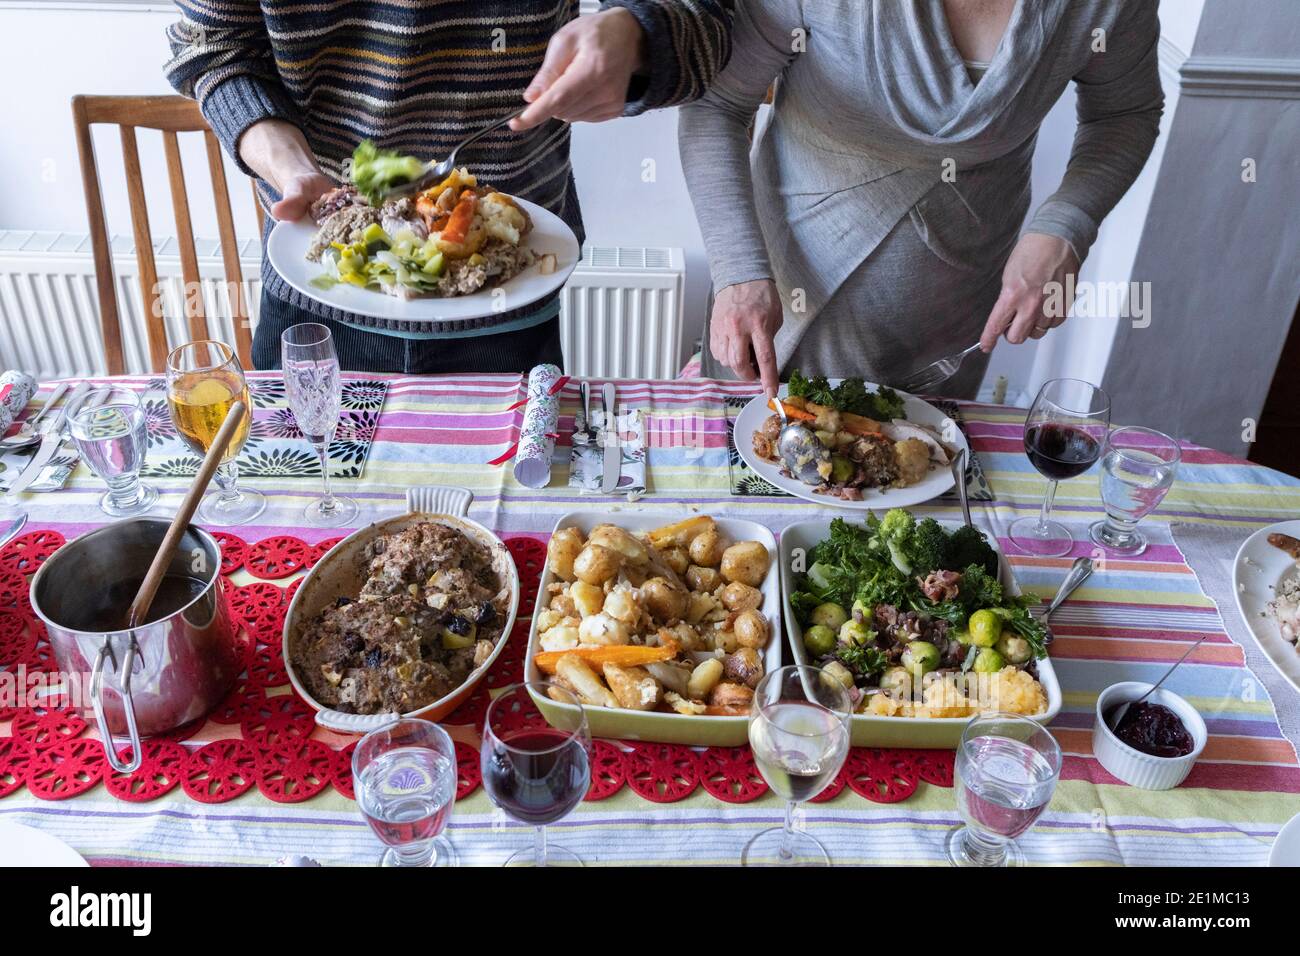 Members of a British family help themselves to a turkey and vegetables Christmas Day lunch, on 25th December 2020 in London, England. Stock Photo